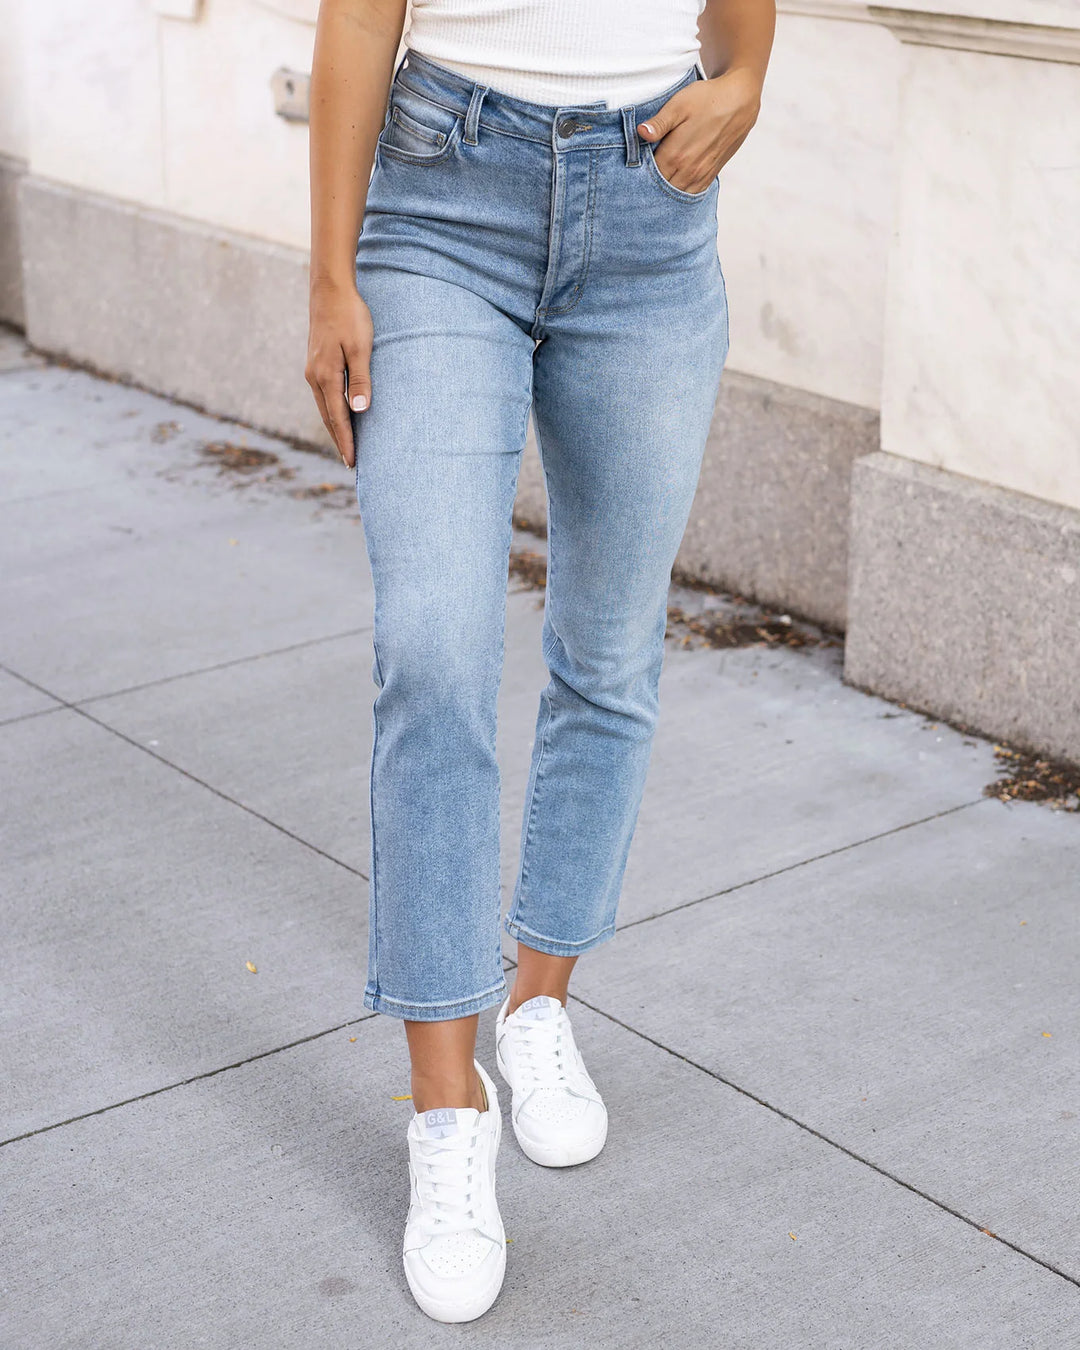 Grace and Lace | Premium Denim High Waisted Mom Jeans | NON DISTRESSED MID WASH